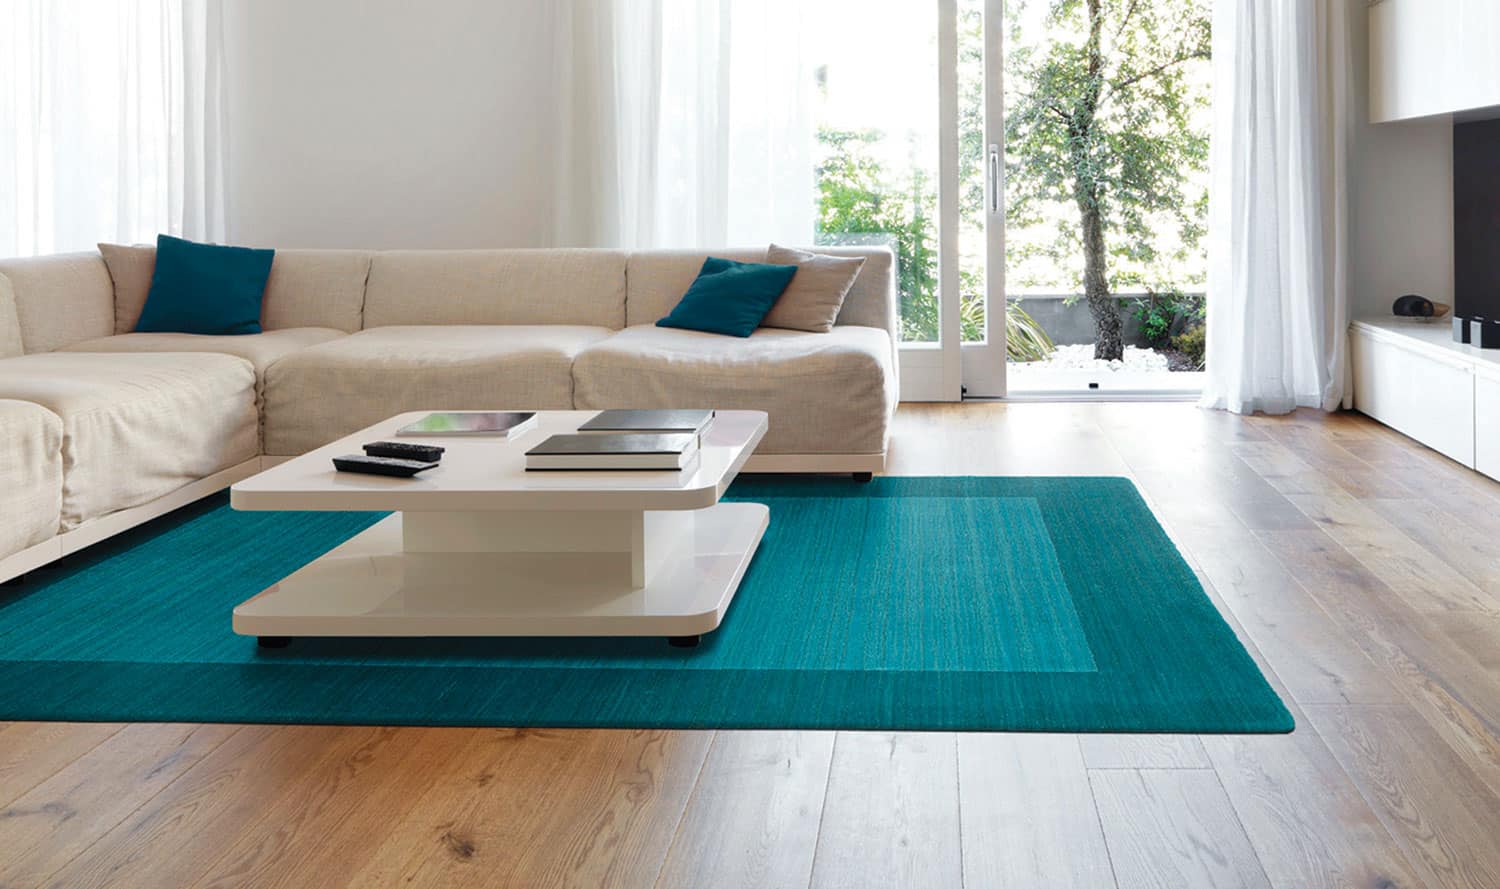 A statement rug doesn't have to have pattern instead you can choose a statement rug that is in a bold color.